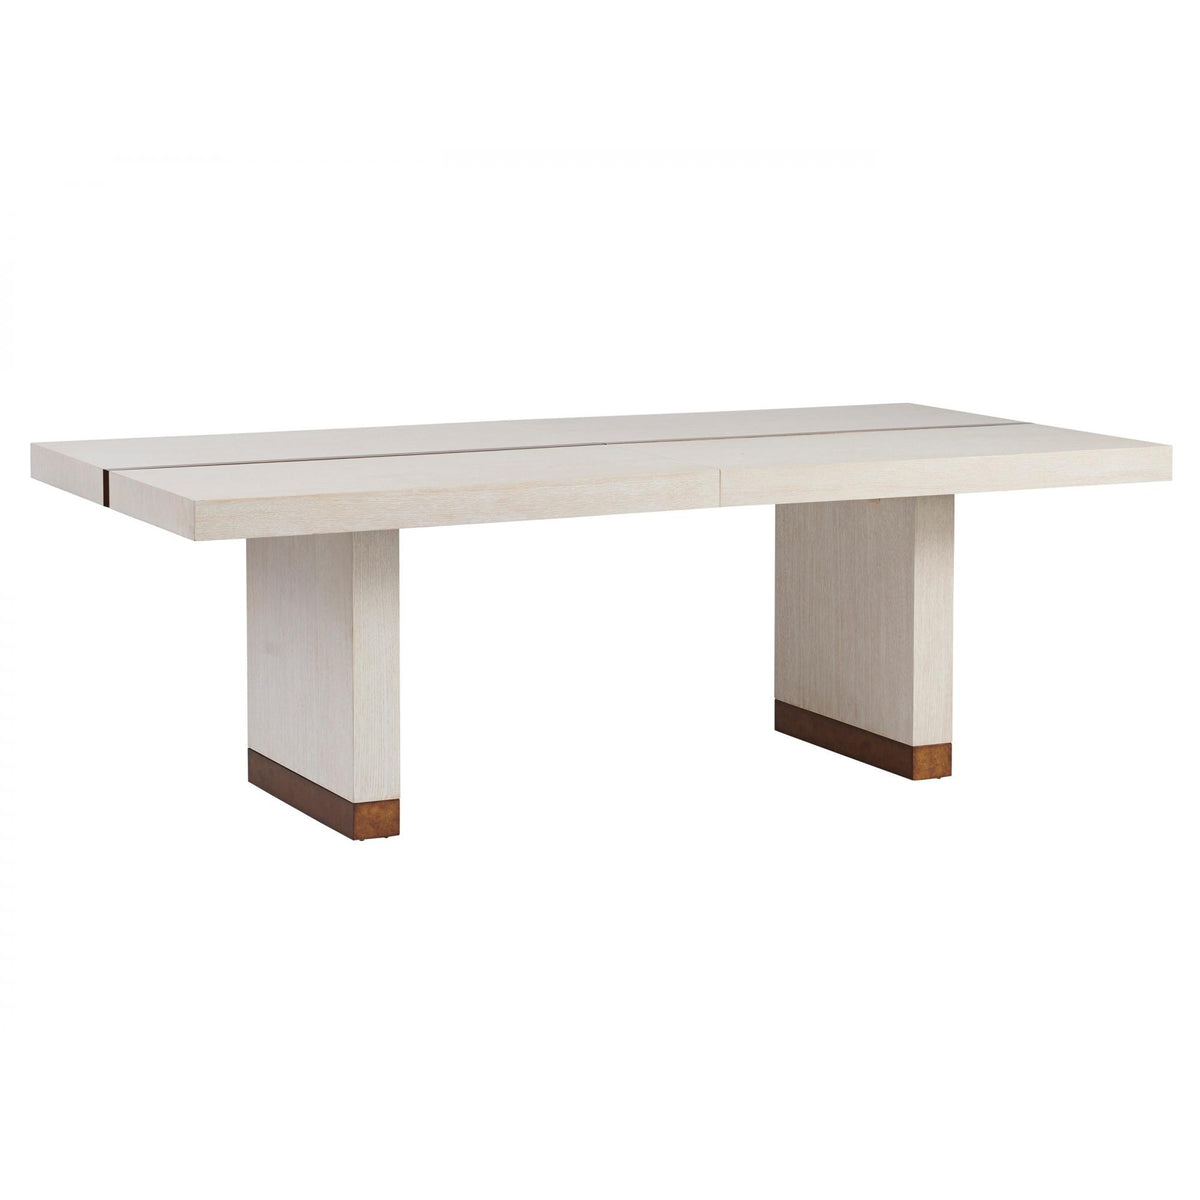 Carmel Dining Table with Pedestal Base IMAGE 1